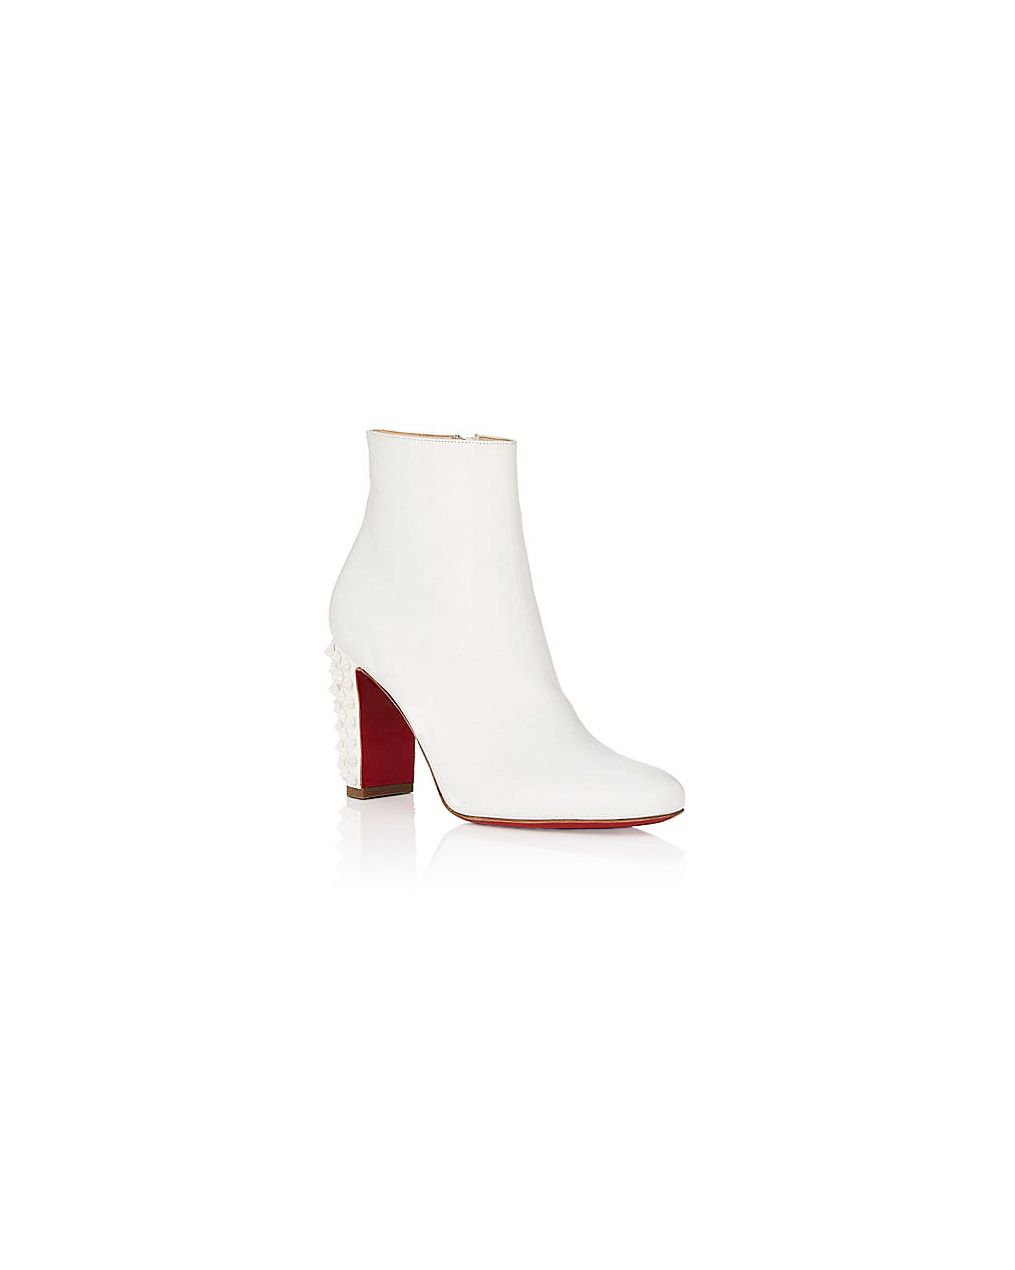 white bridal booties christian louboutin suzi ankle boots with red bottoms